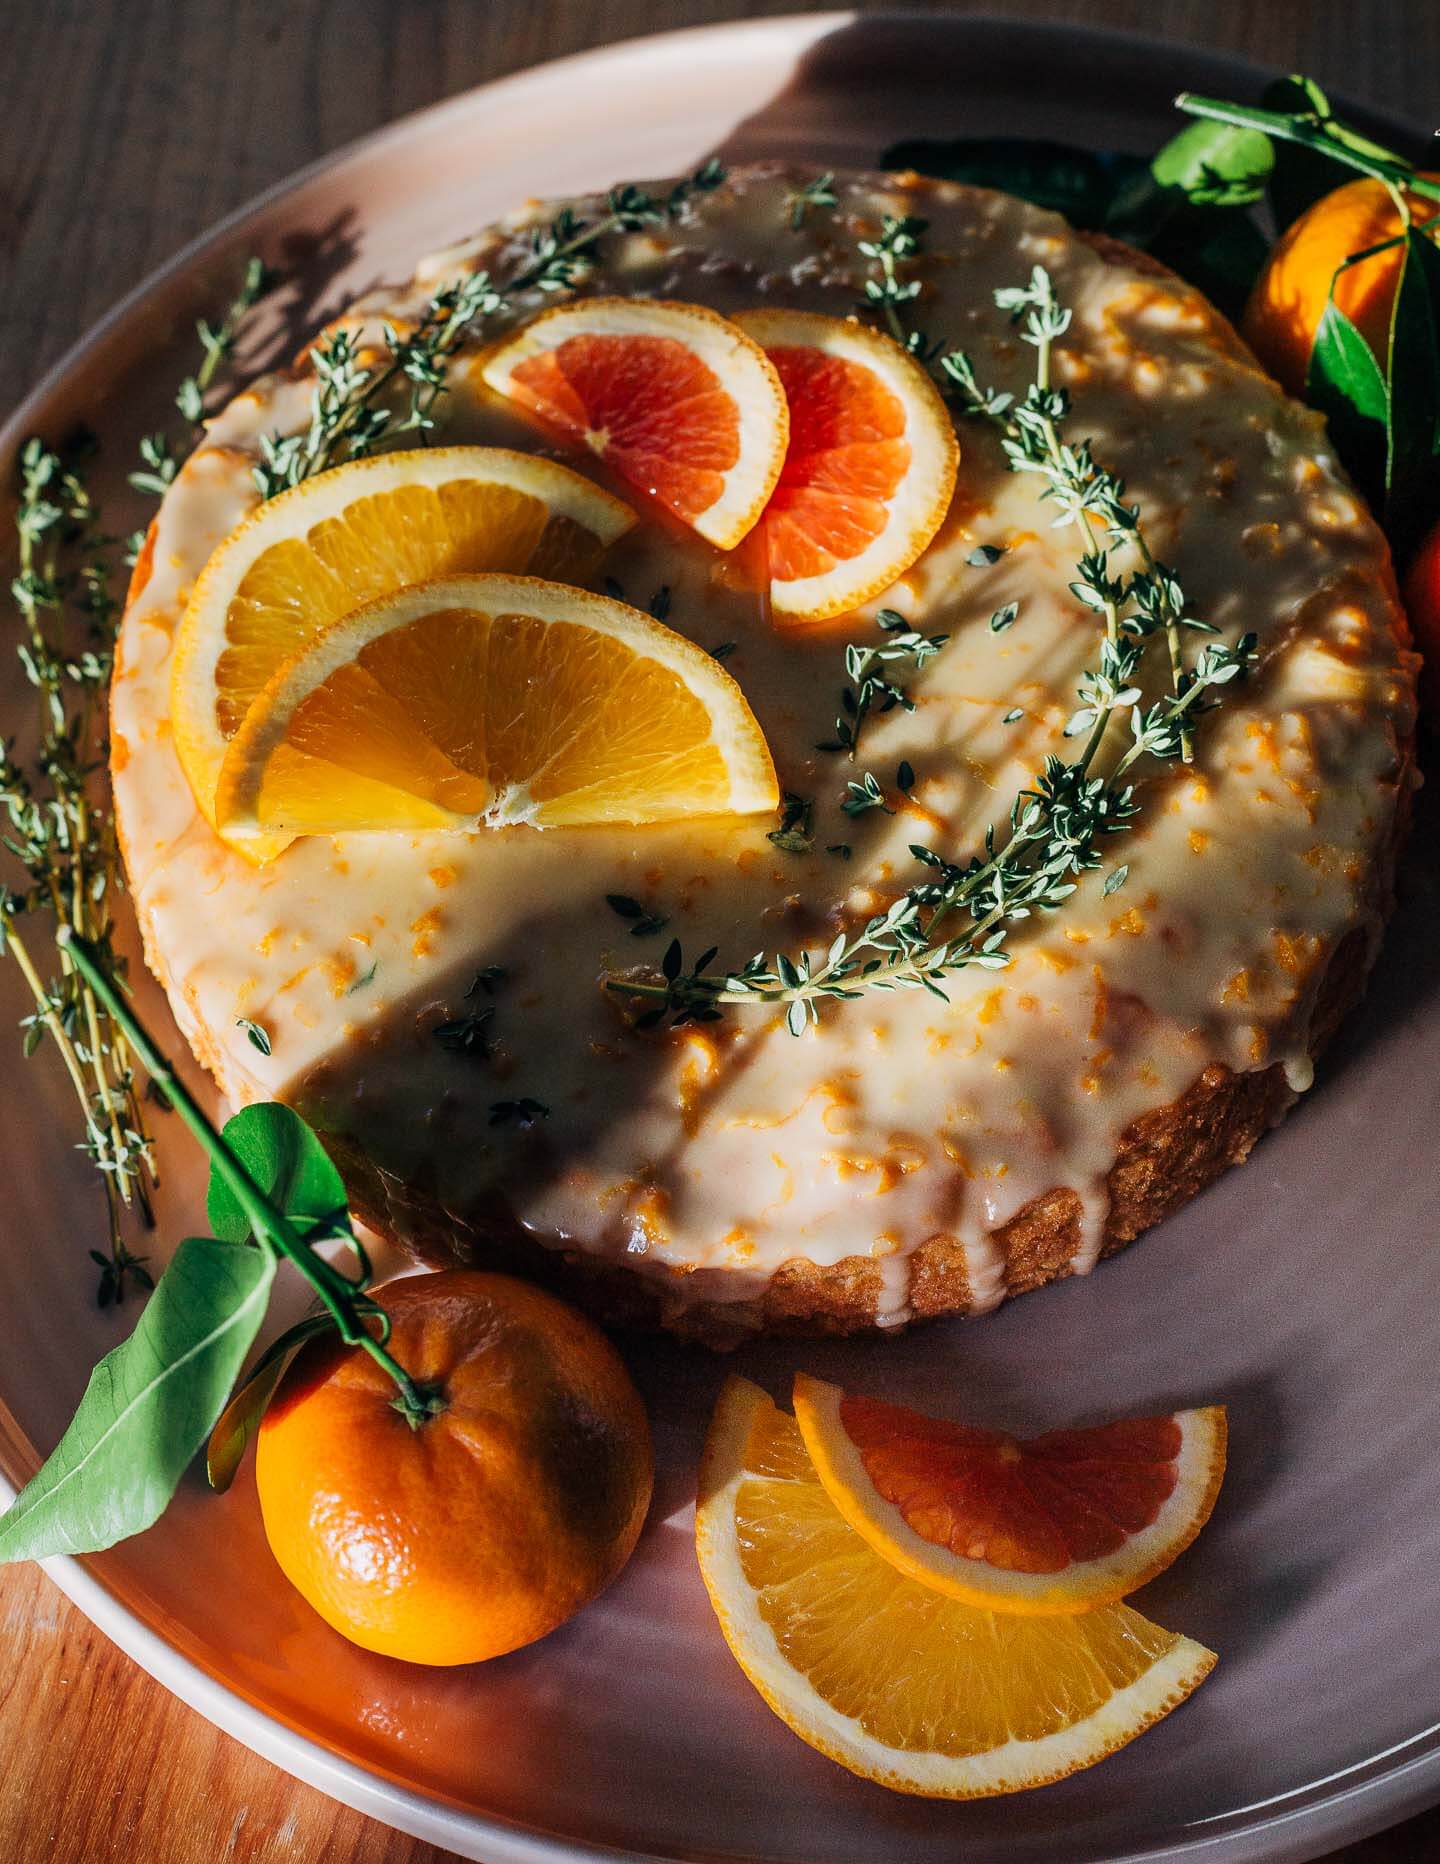 A platter with a glazed cake. It’s garnished with thyme sprigs, sliced citrus, and leafy whole citrus. Cake is pictured in raking sunlight.